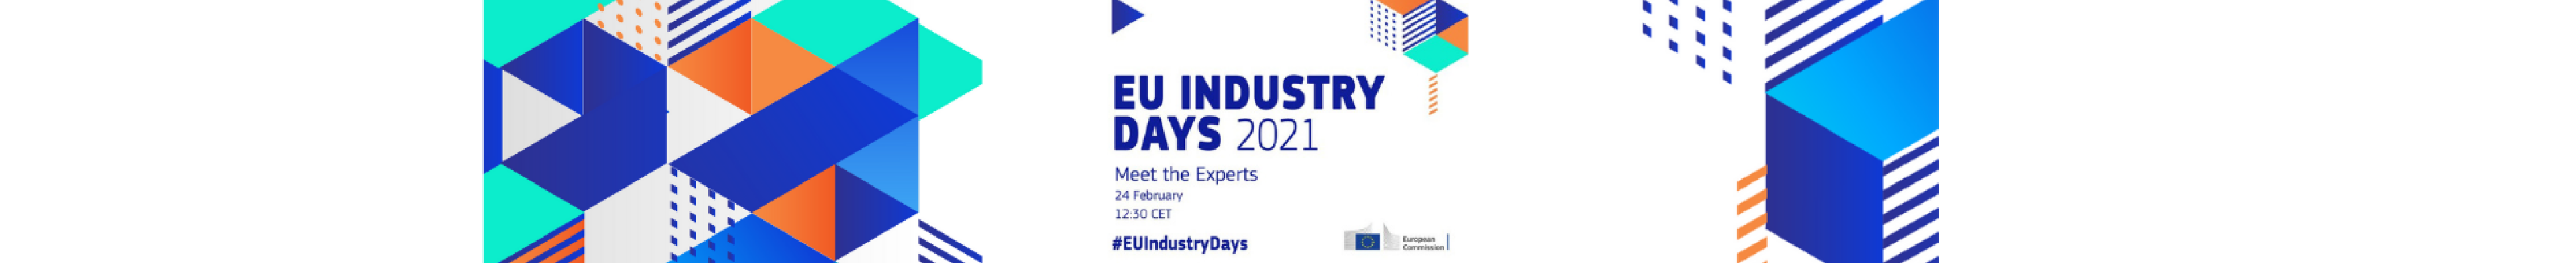 banner-eu_industry_days.png